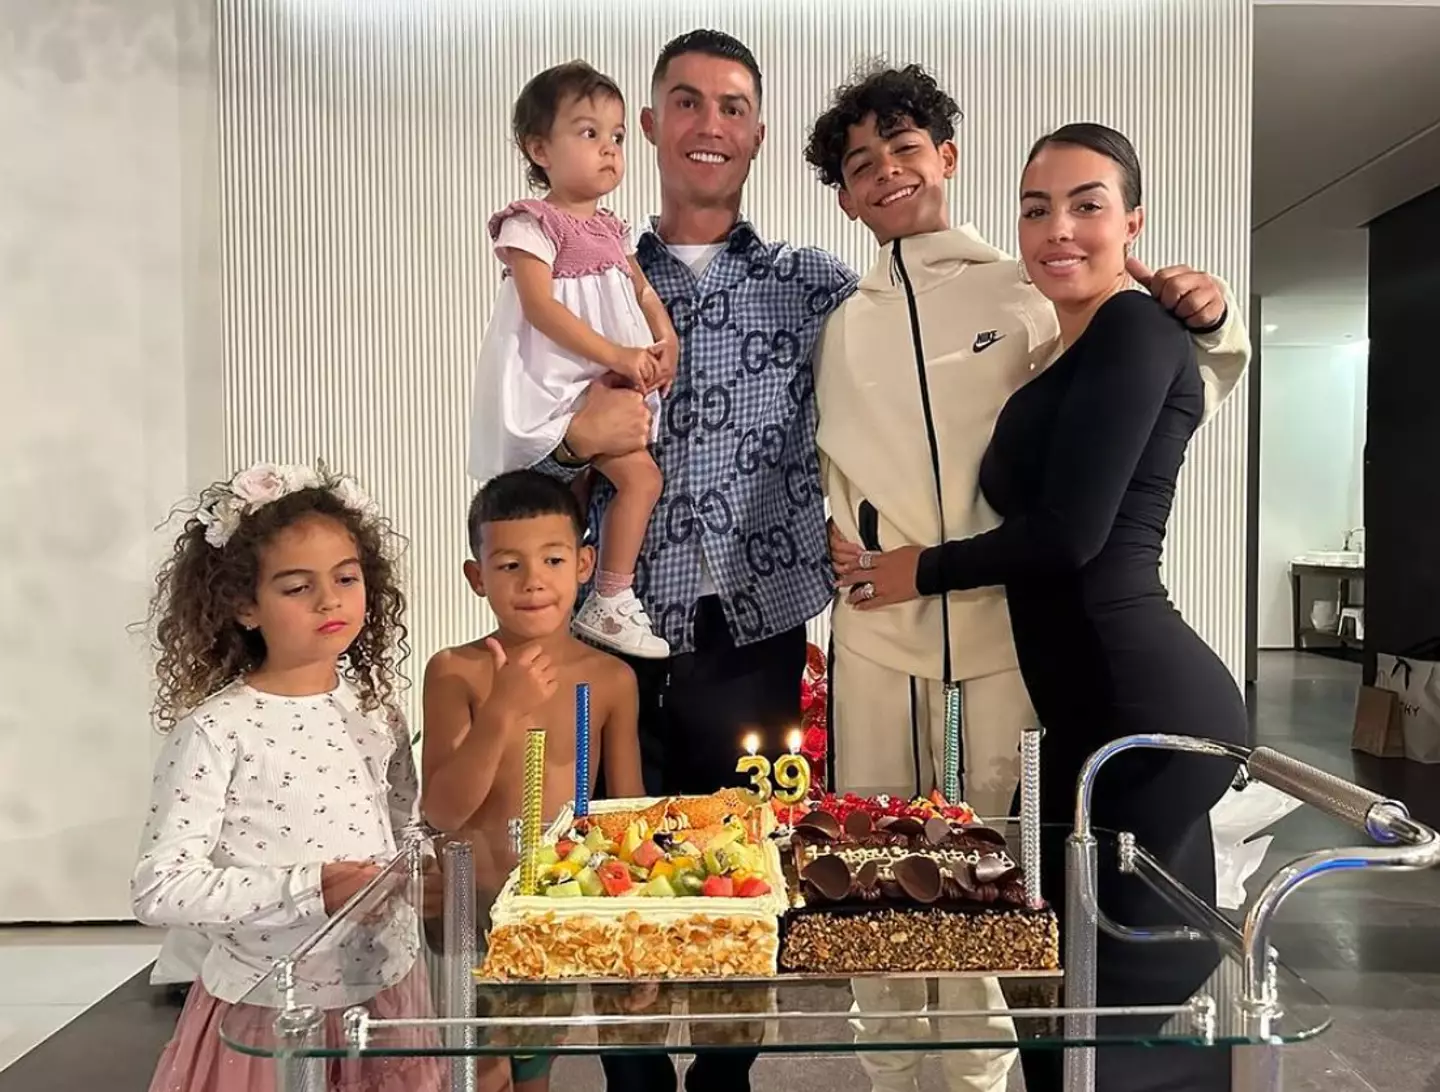 Ronaldo's posted a picture alongside his five children and Rodriguez on his birthday. (Image